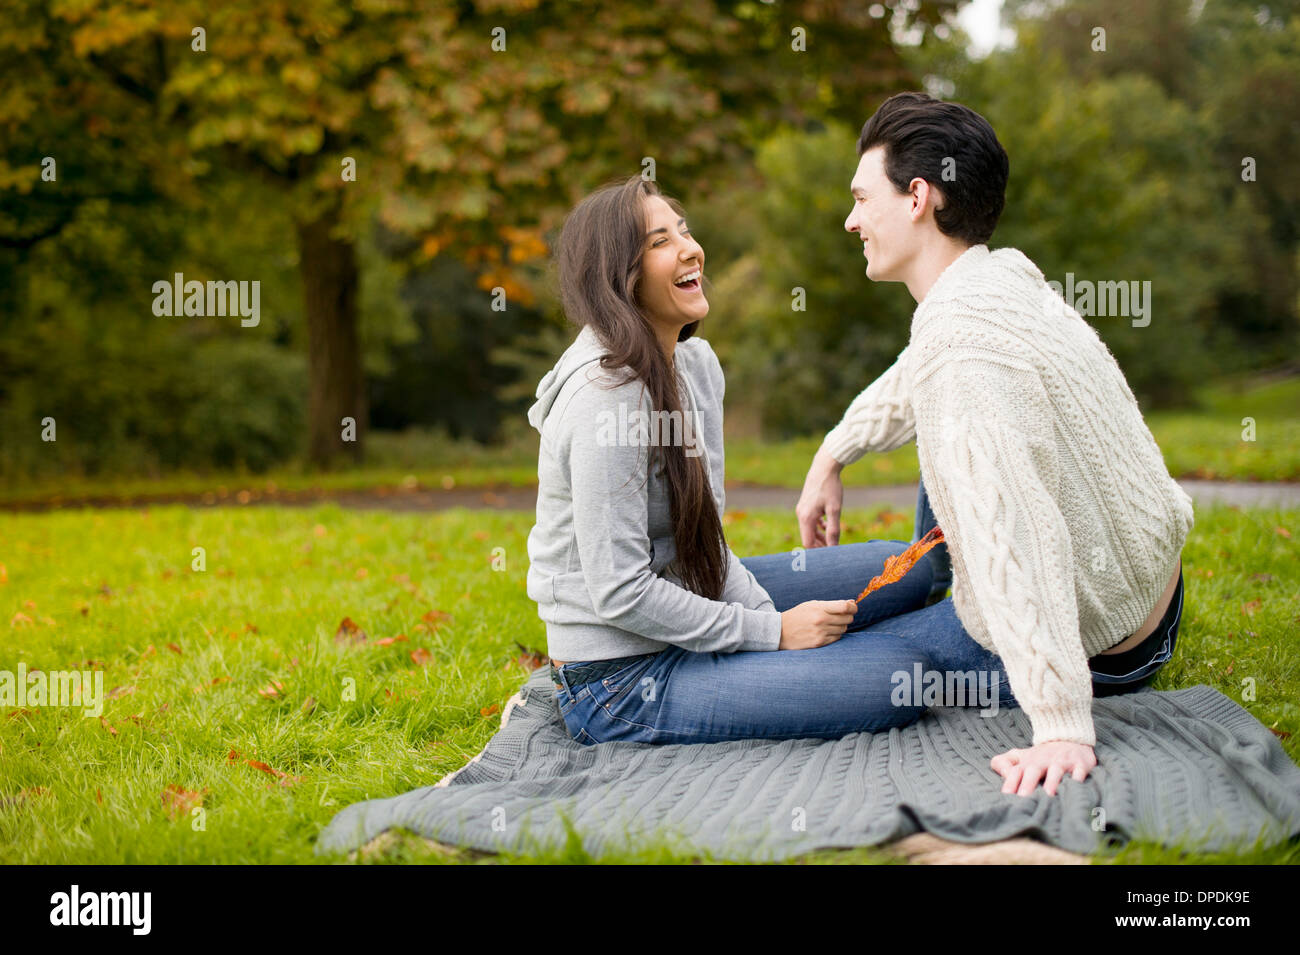 Jeune couple on blanket in park, laughing Banque D'Images